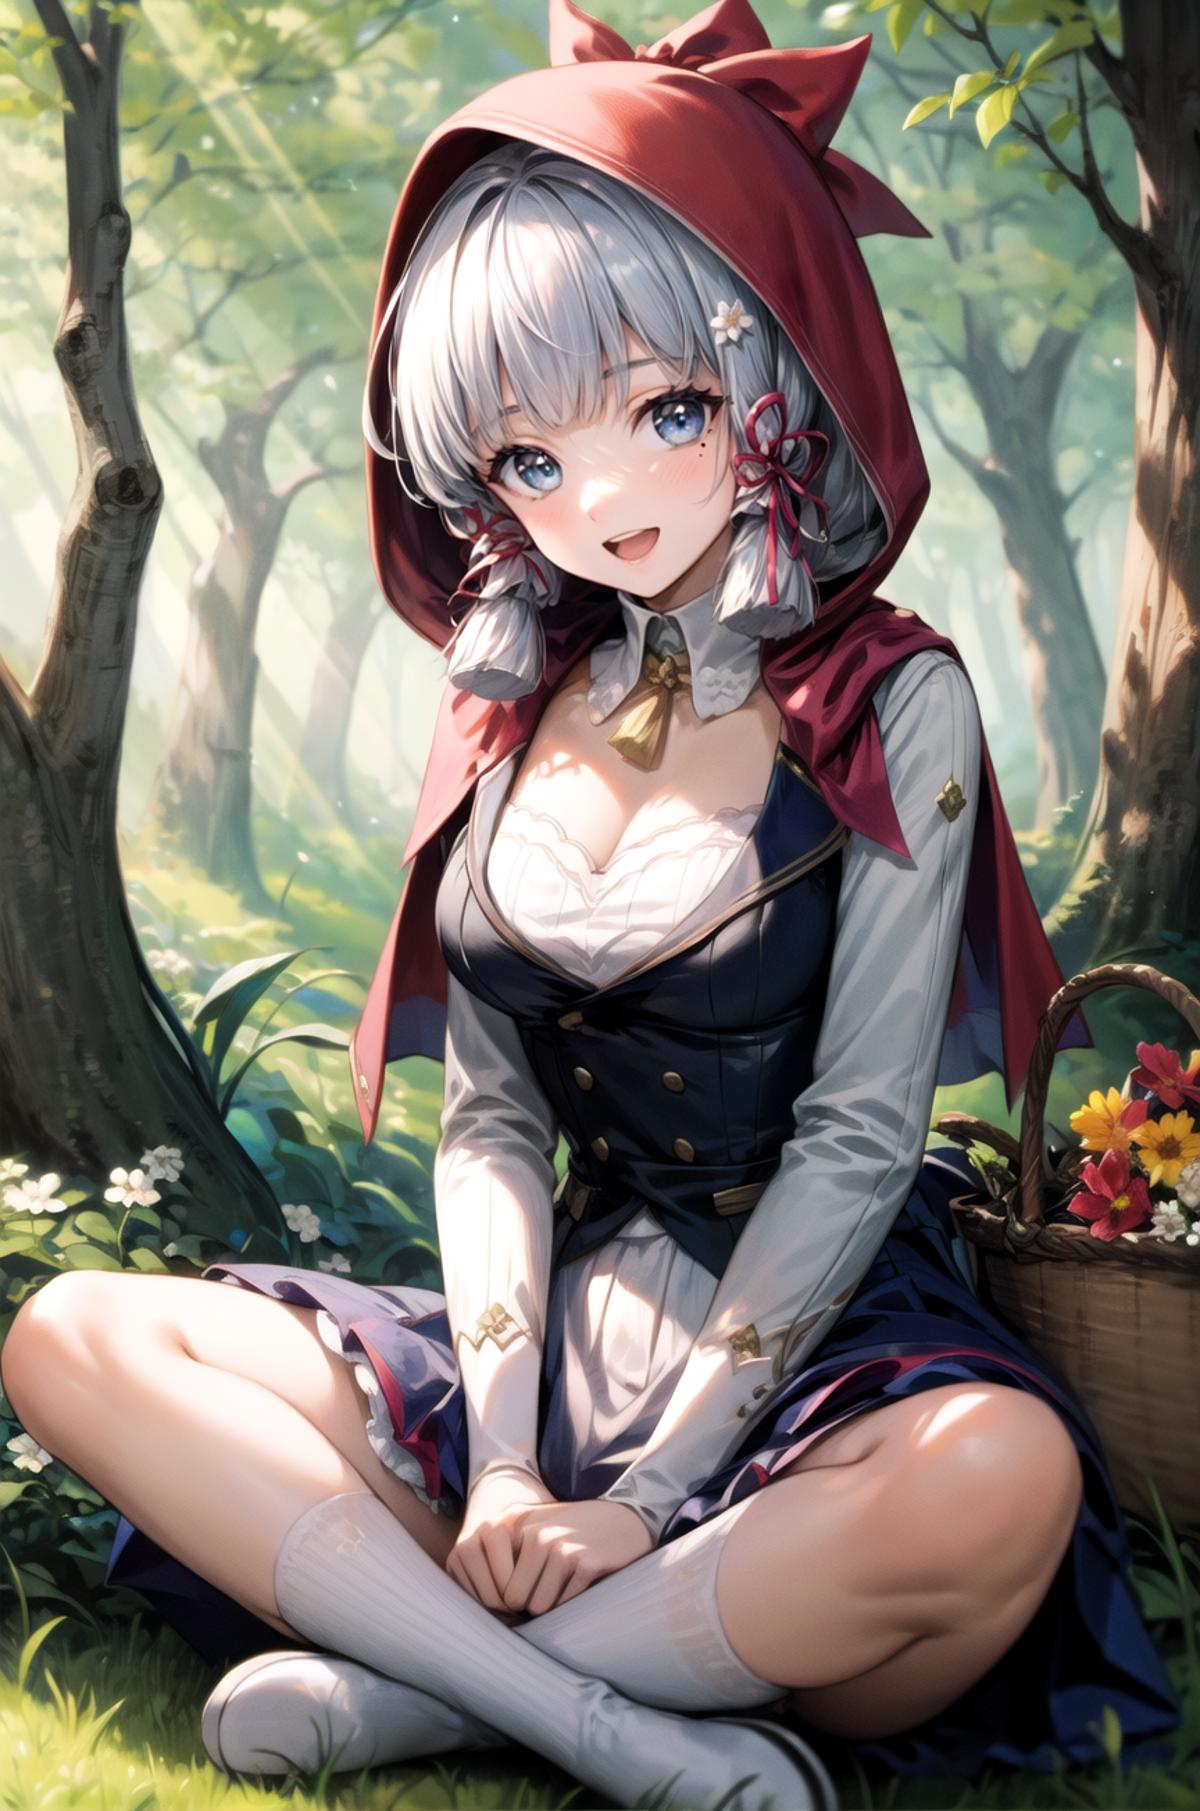 Little red riding hood image by Deto15